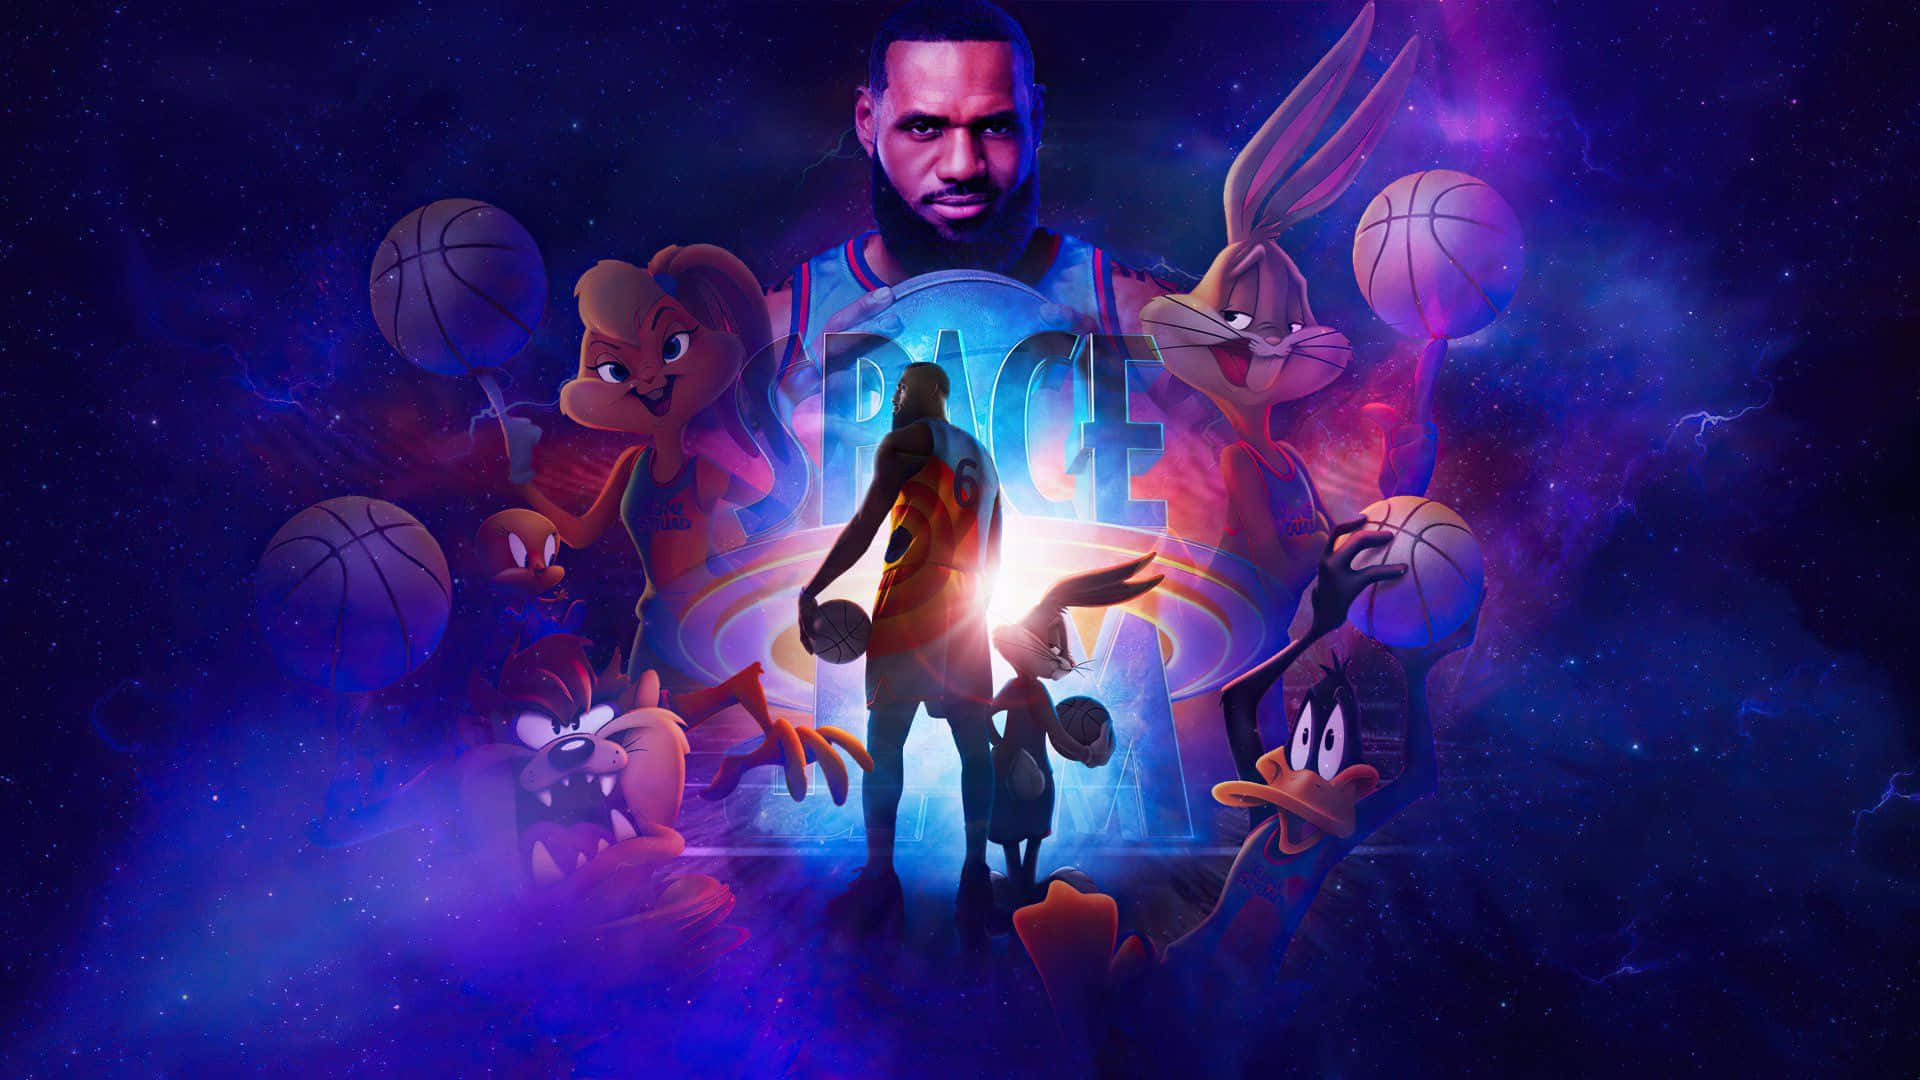 Tune Squad is getting ready to take down the Goon Squad in Space Jam: A New Legacy. Wallpaper